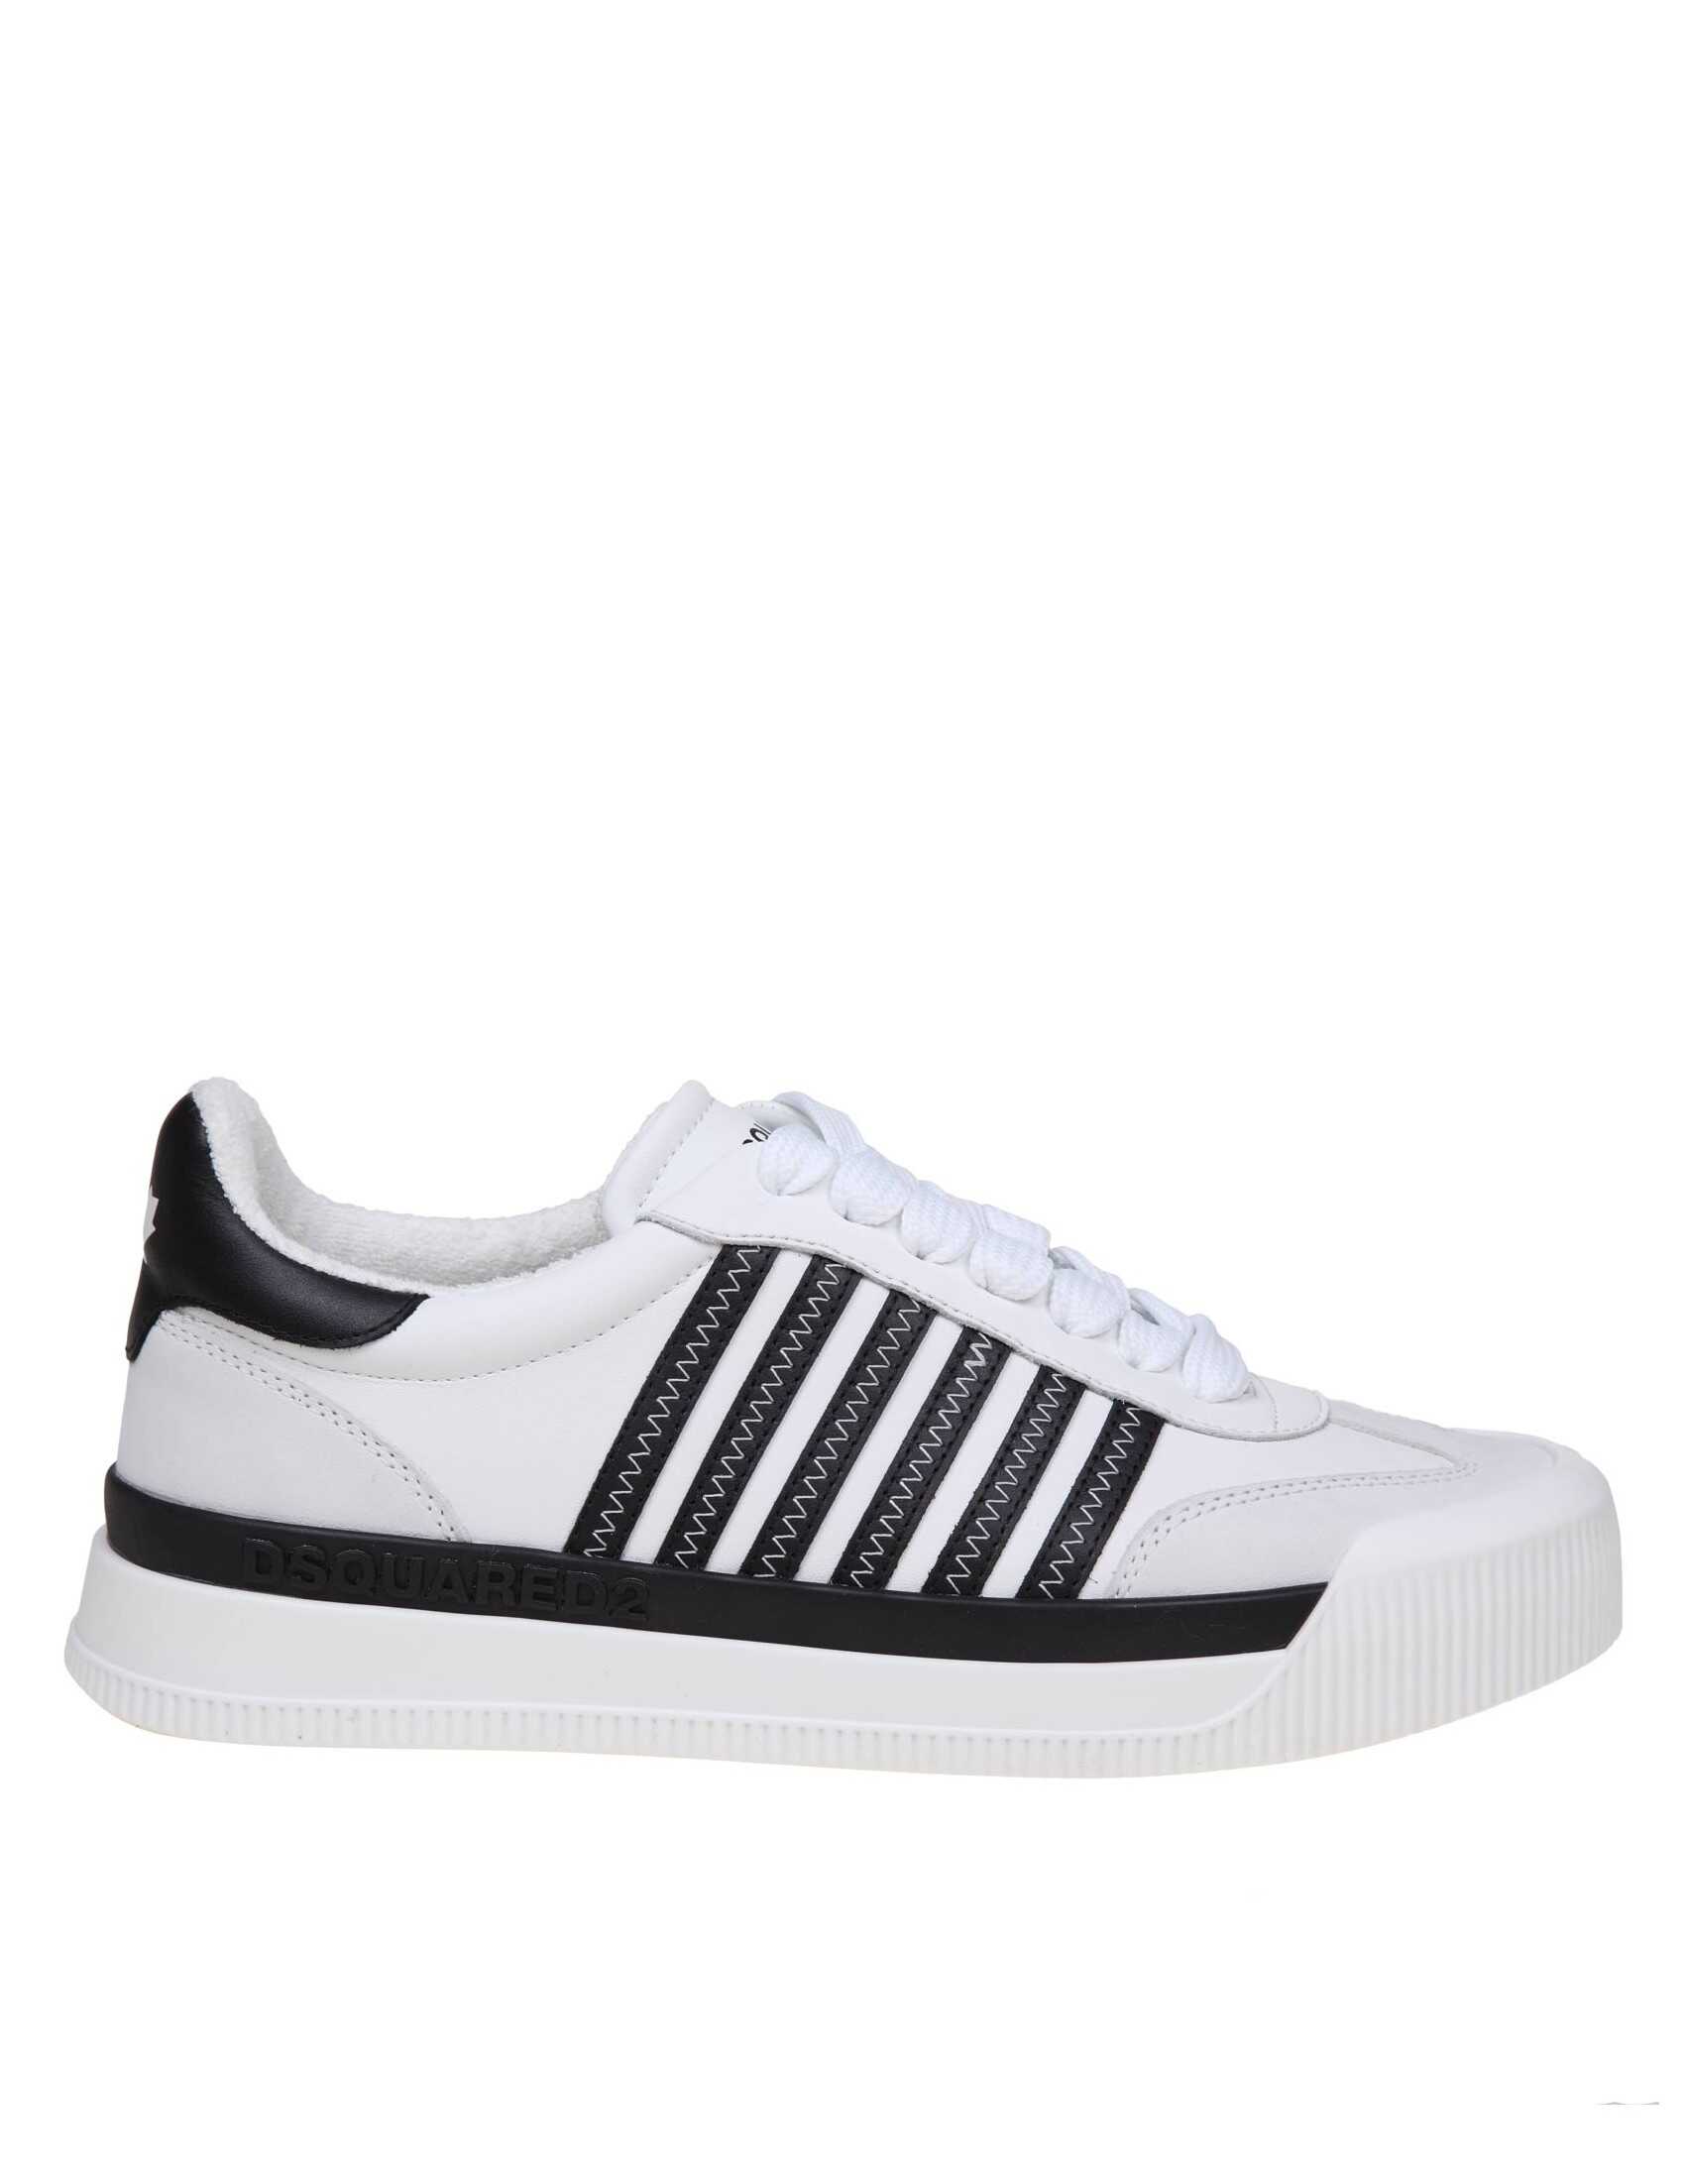 DSQUARED2 Dsquared2 new jersey sneakers in white/black leather White